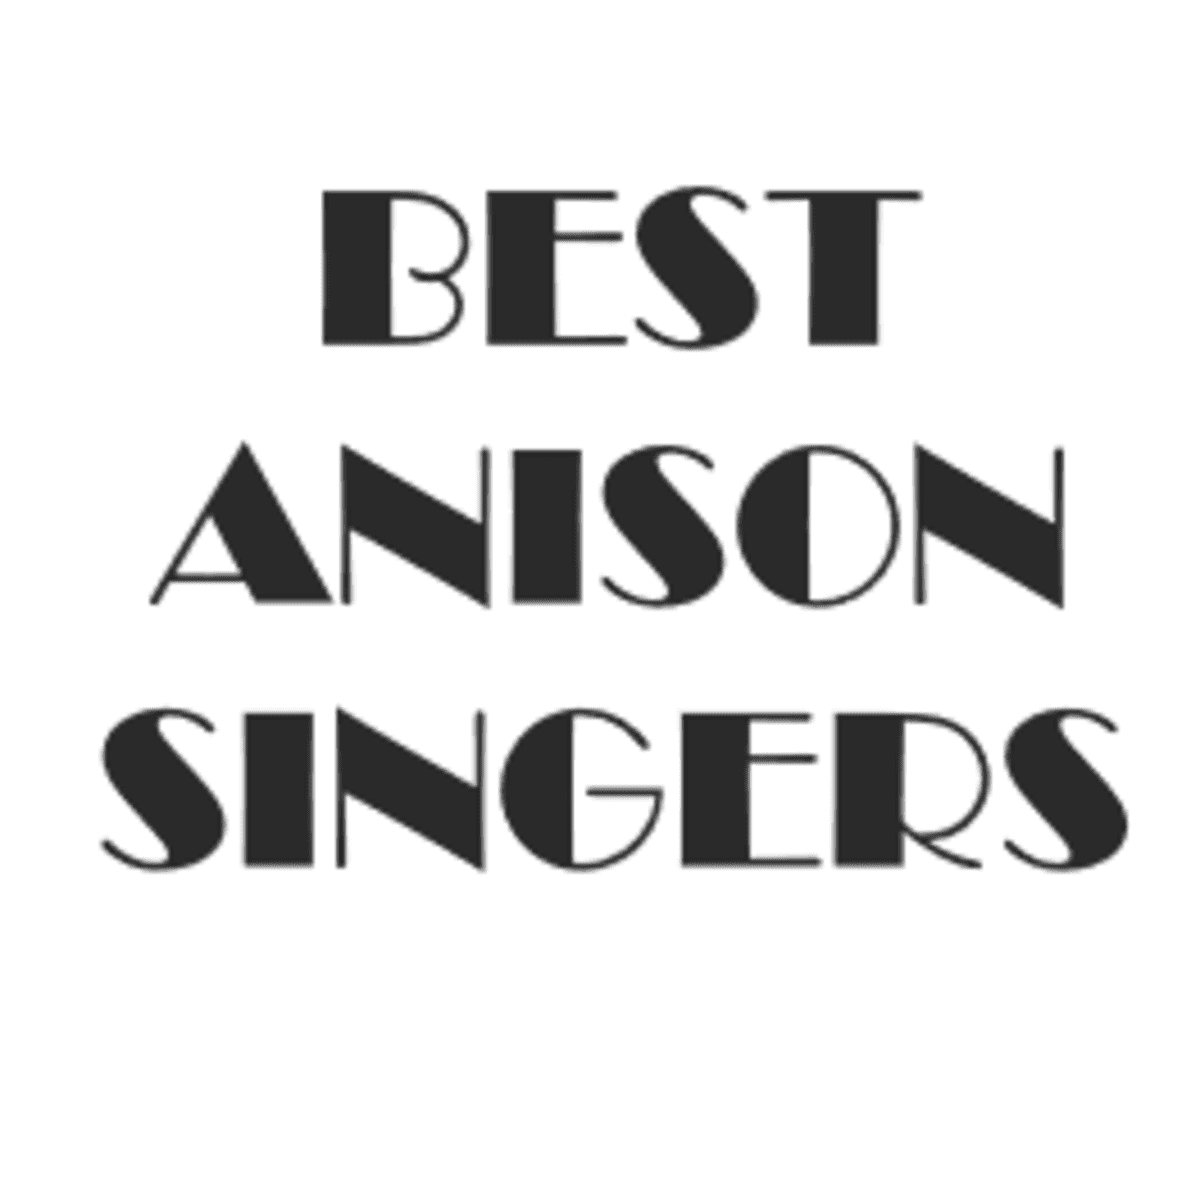 6 Best Anison Anime Song Singers Spinditty Music